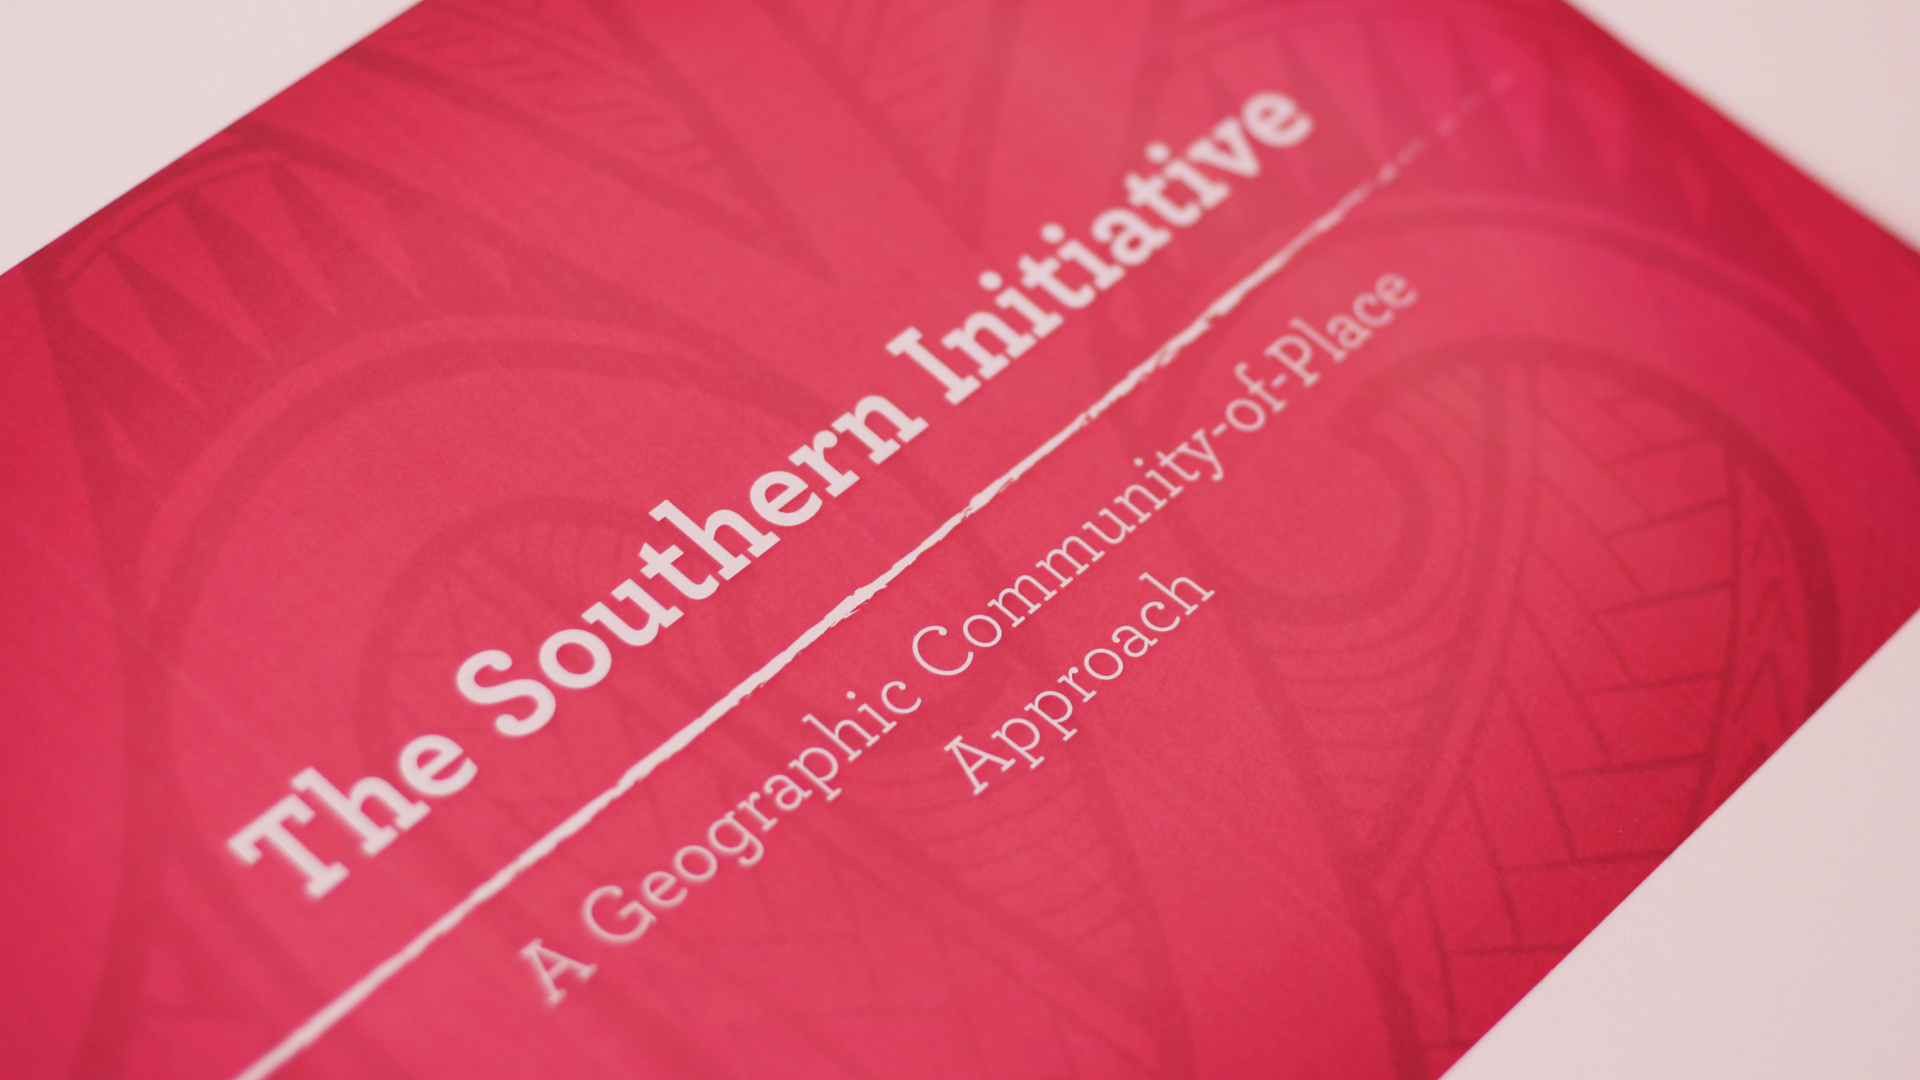 The Southern Initiative document